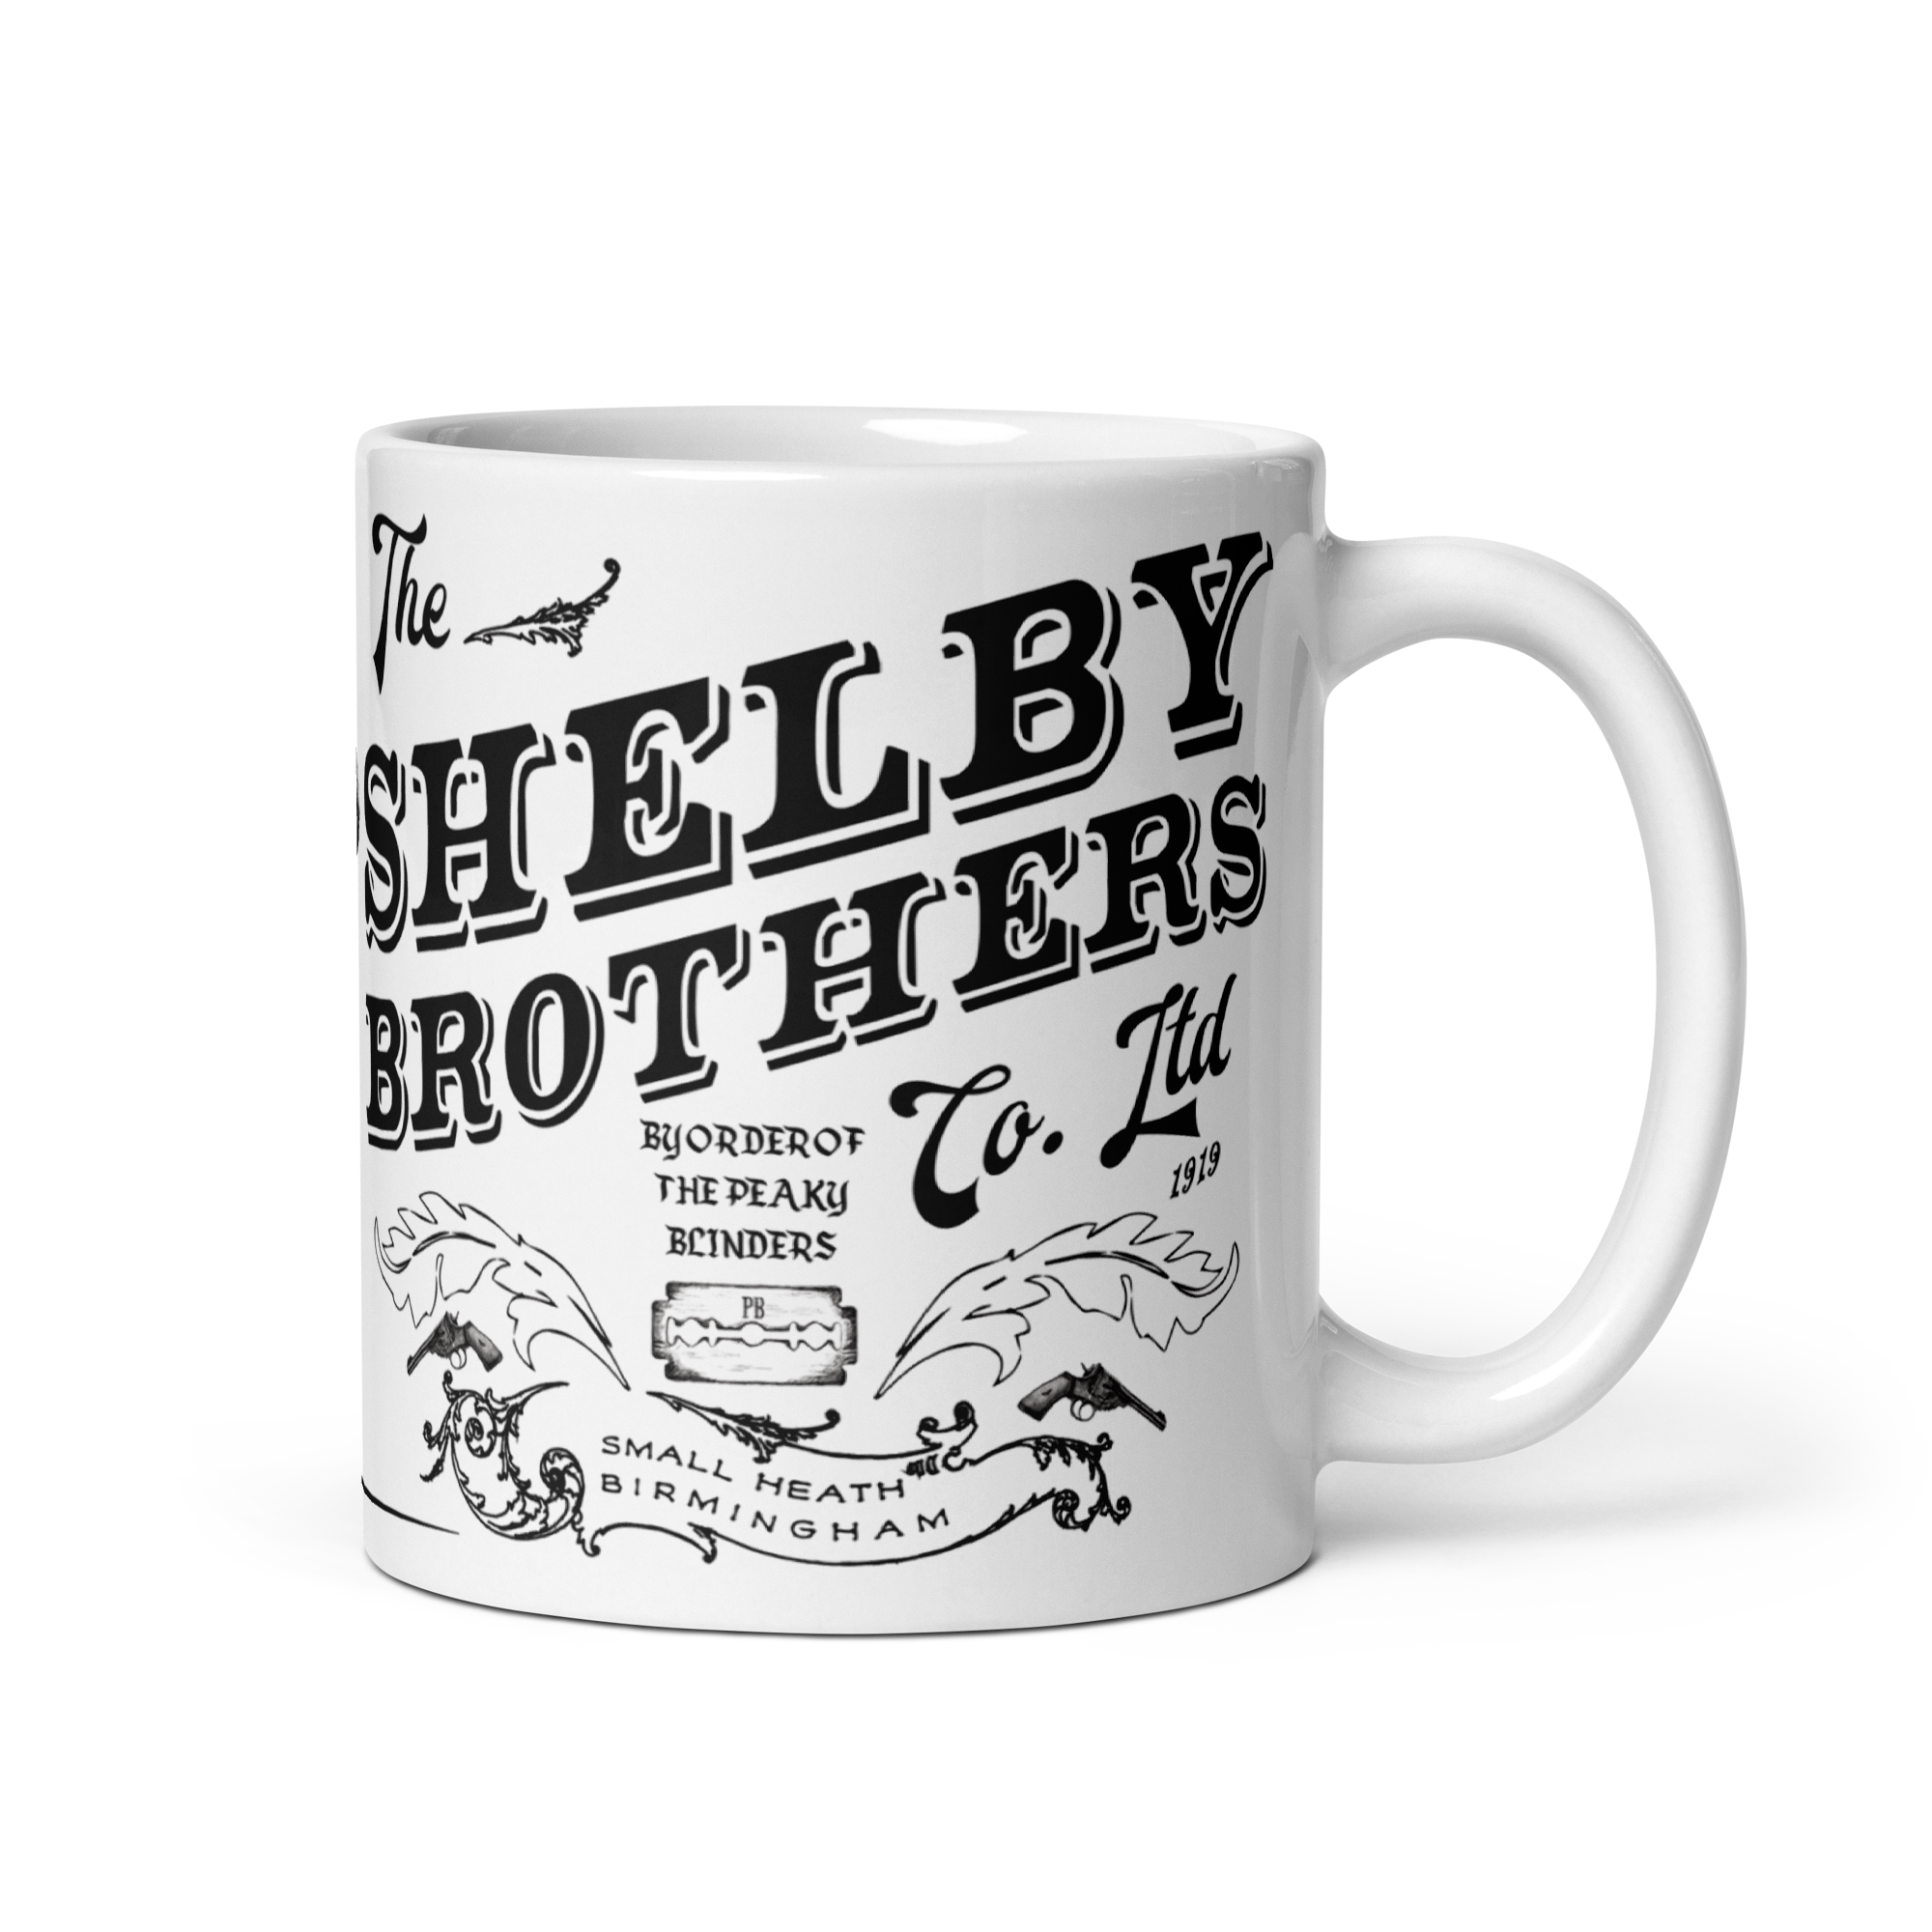 Peaky Blinders - The Shelby Brothers Co Ltd Mug